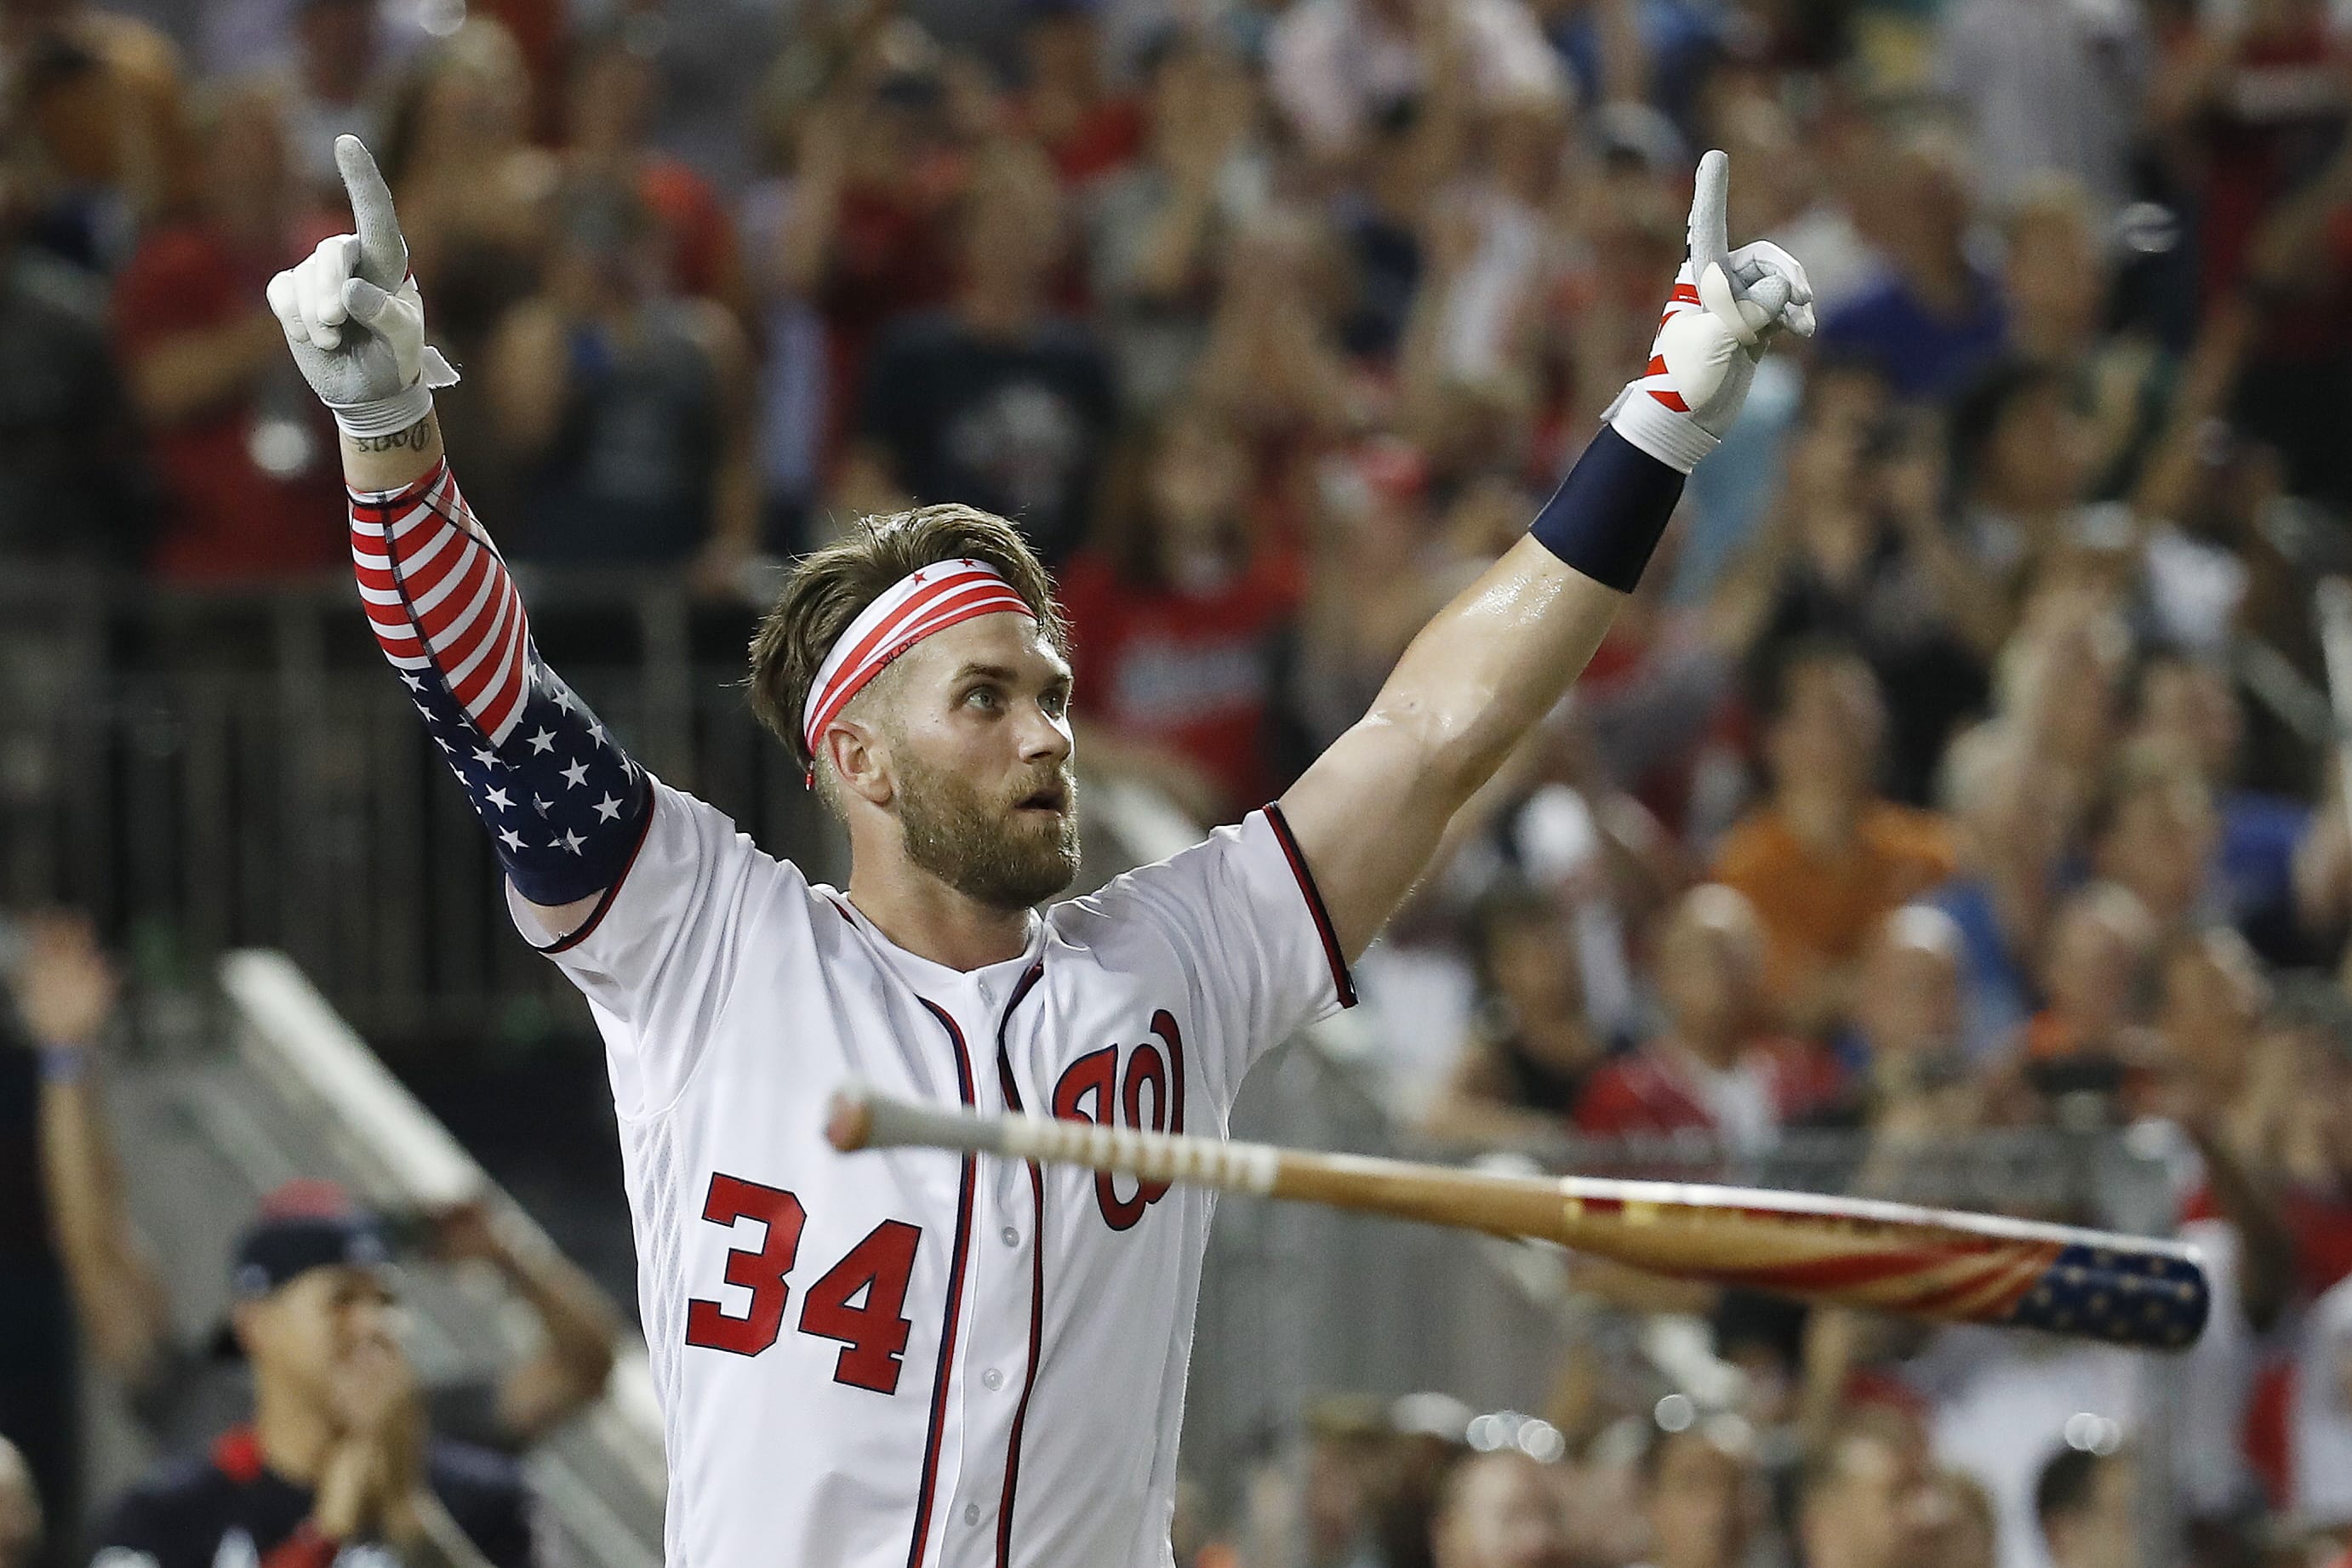 Washington Nationals Bryce Harper (34) reacts to his winning hit during the Major League Baseball Home Run Derby, Monday, July 16, 2018 in Washington.